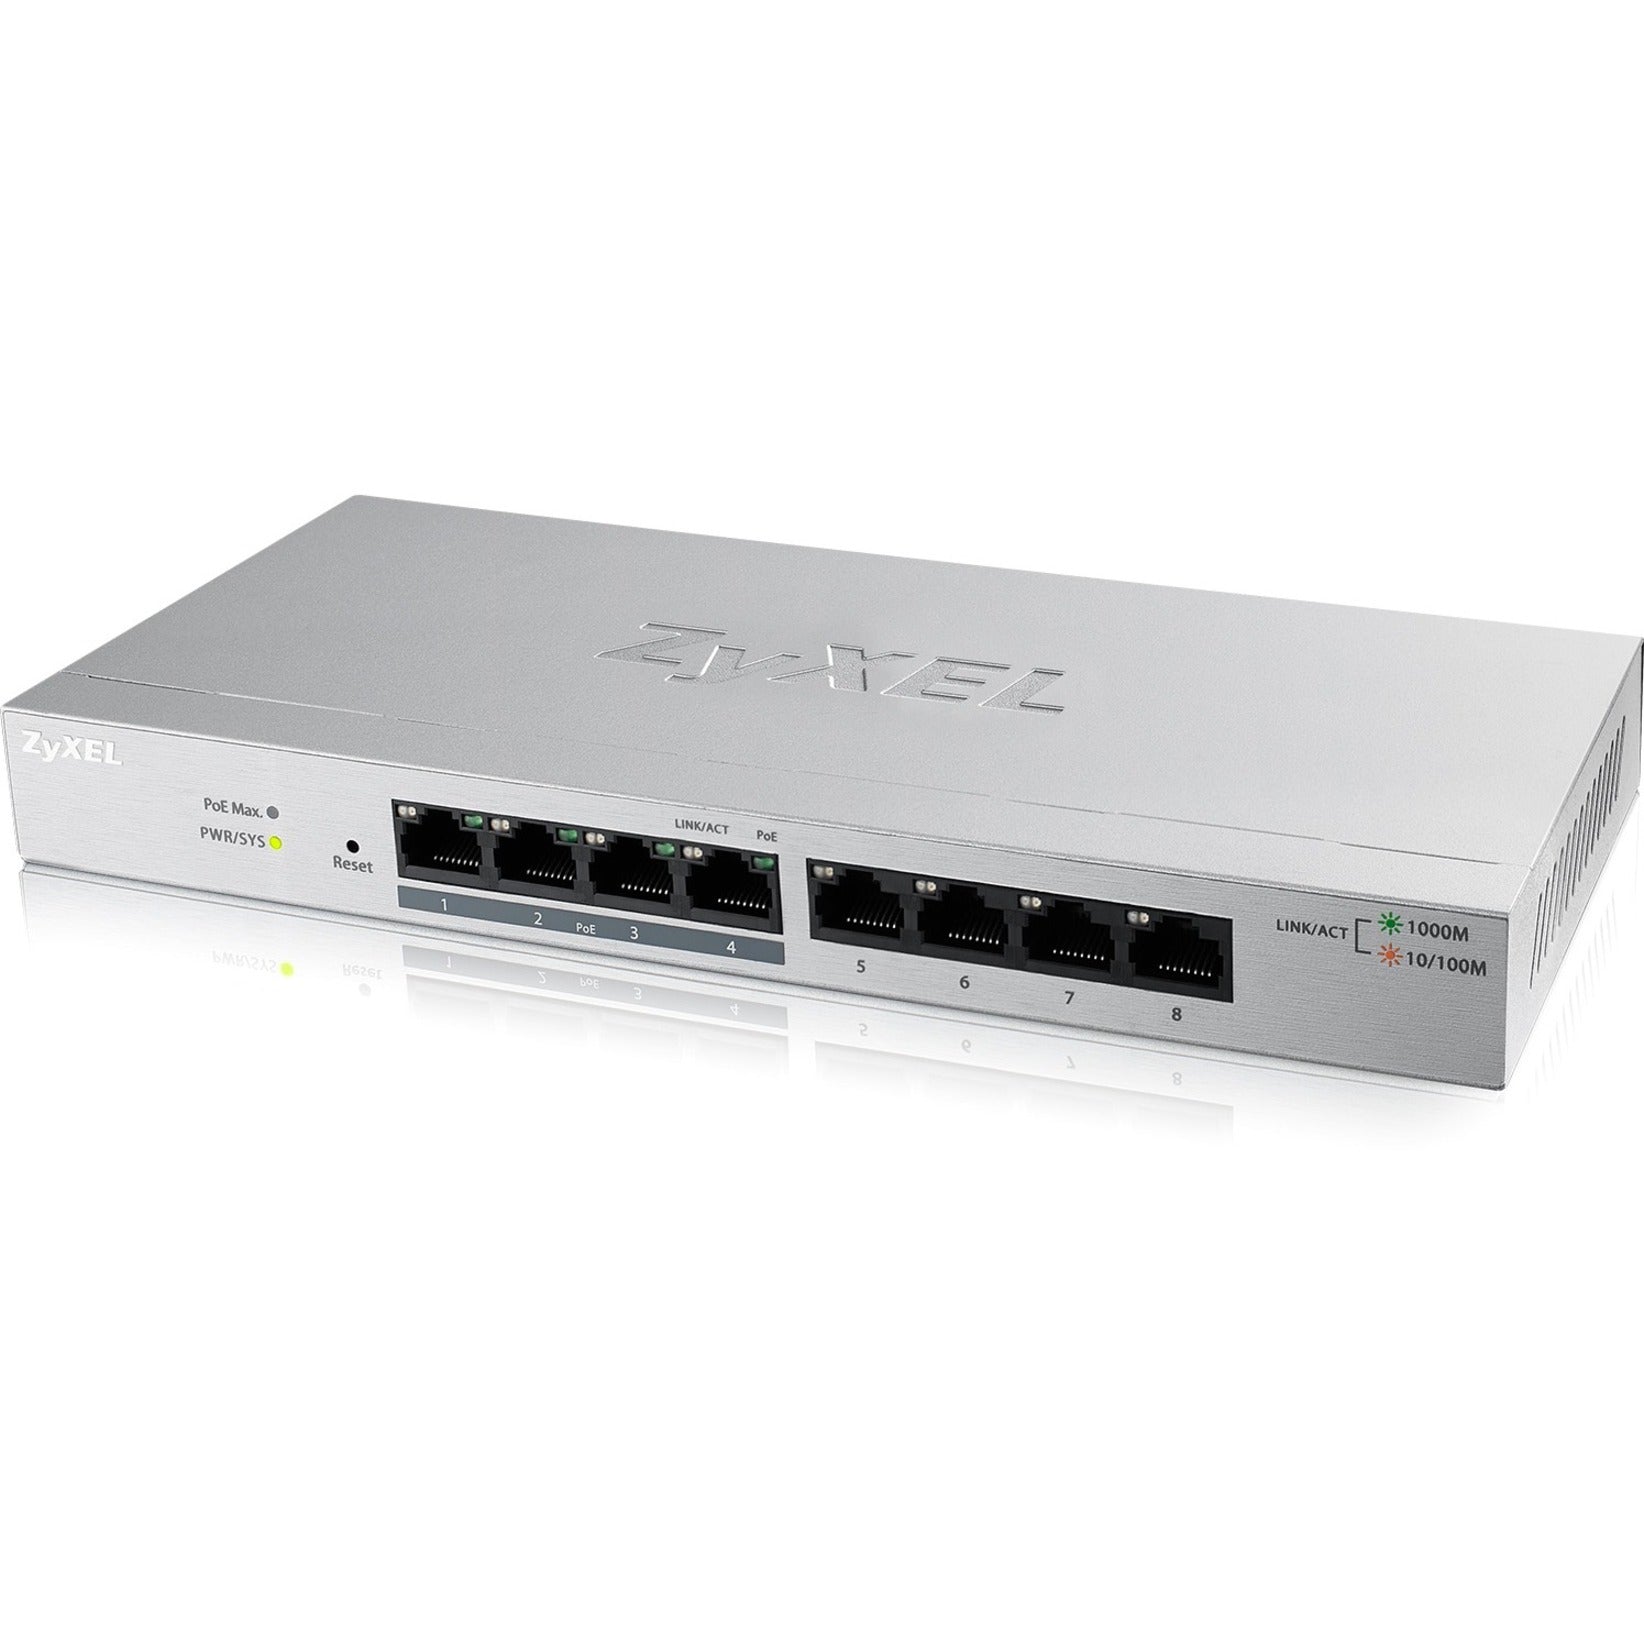 ZYXEL GS1200-8HP 8-Port GbE Web Managed PoE Switch, Gigabit Ethernet Network, Environmentally Friendly